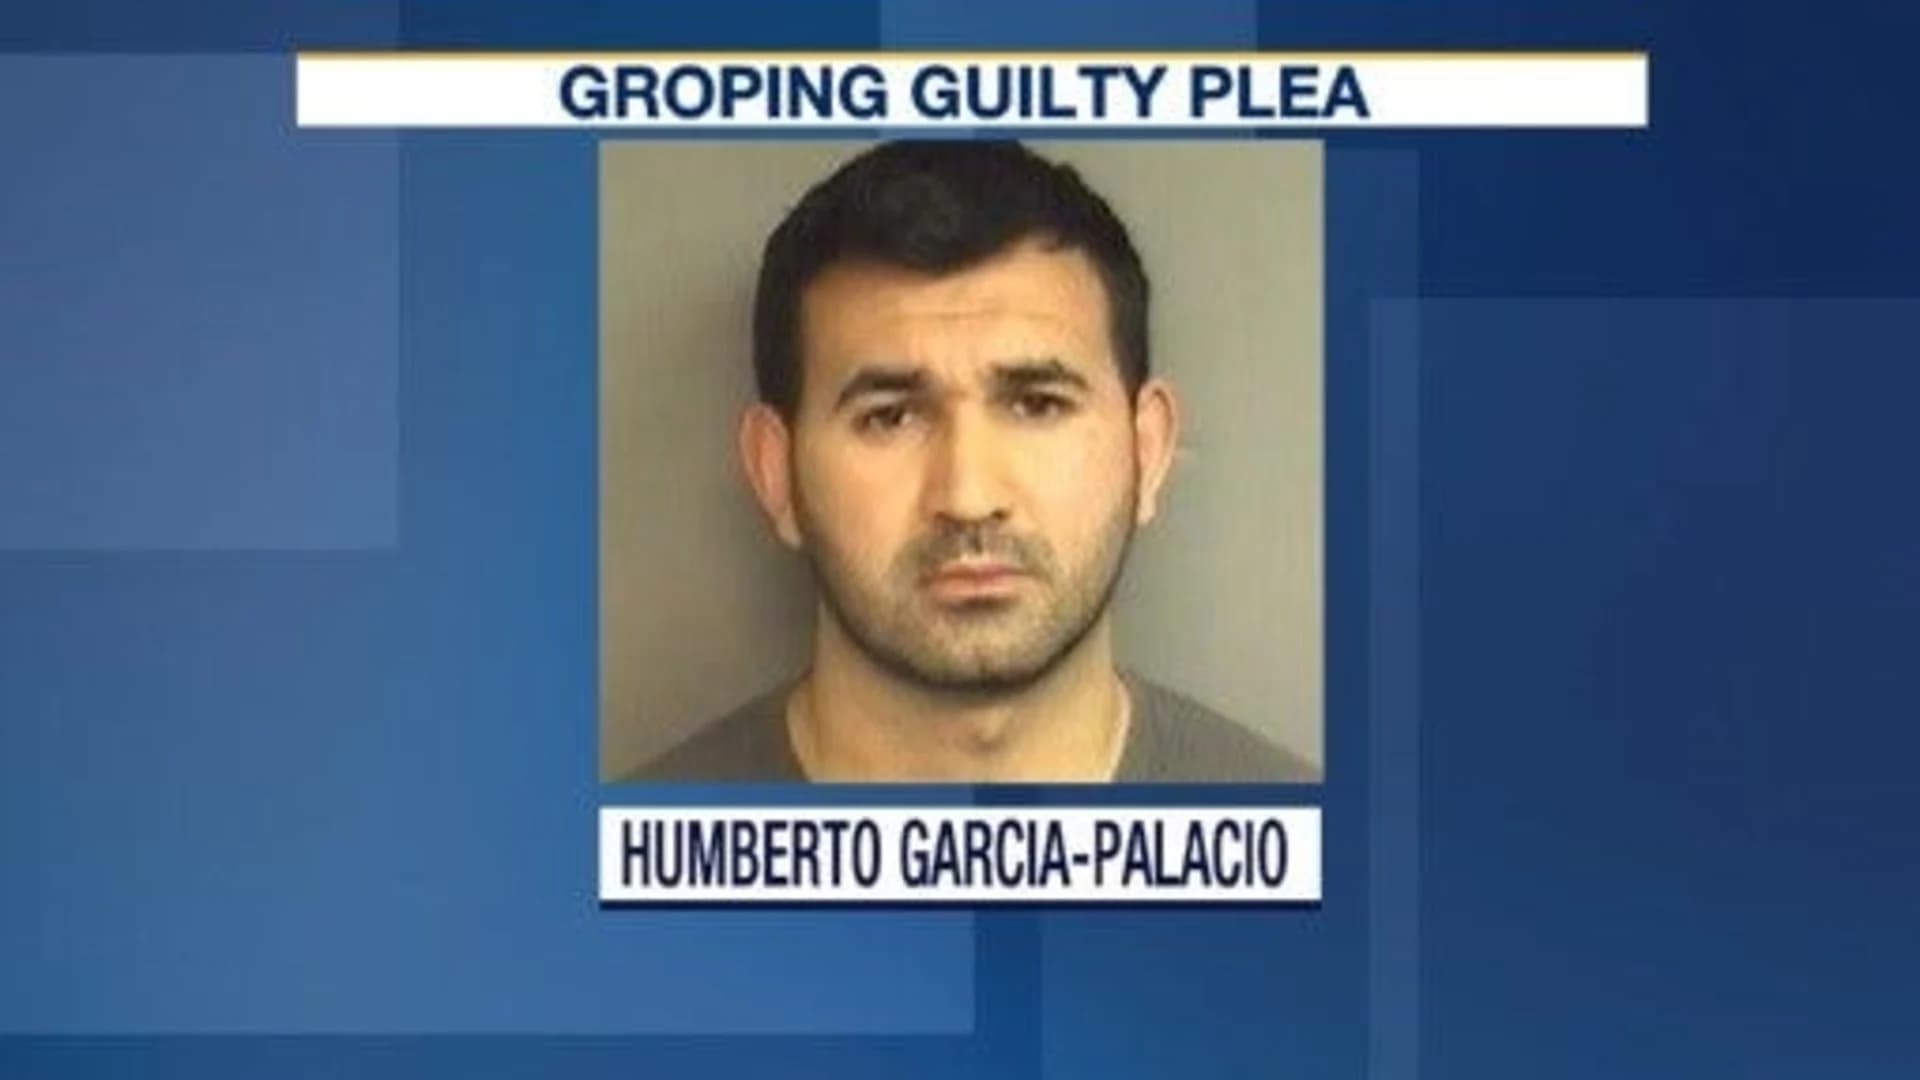 Man pleads guilty to groping teen girl near Stamford bus stop